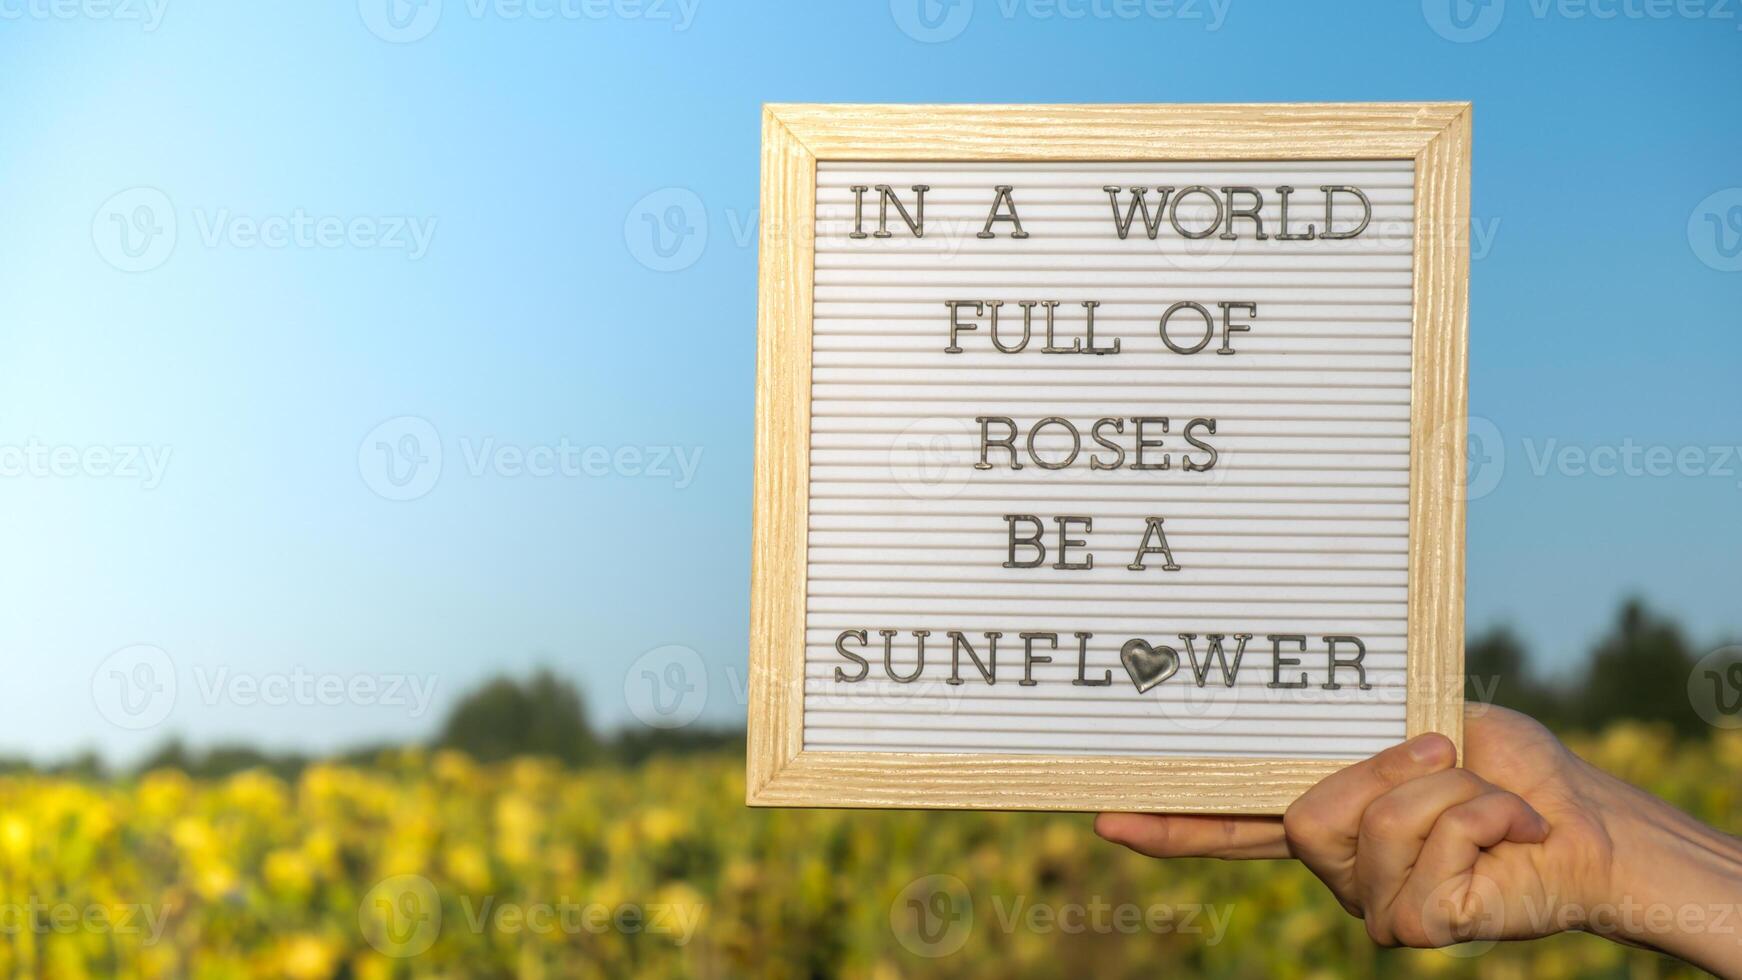 IN A WORLD FULL OF ROSES BE A SUNFLOWER text on white board next to sunflower field. Motivational caption inspirational quote. Be unique saying phrase humor concept. Sunny summer day photo